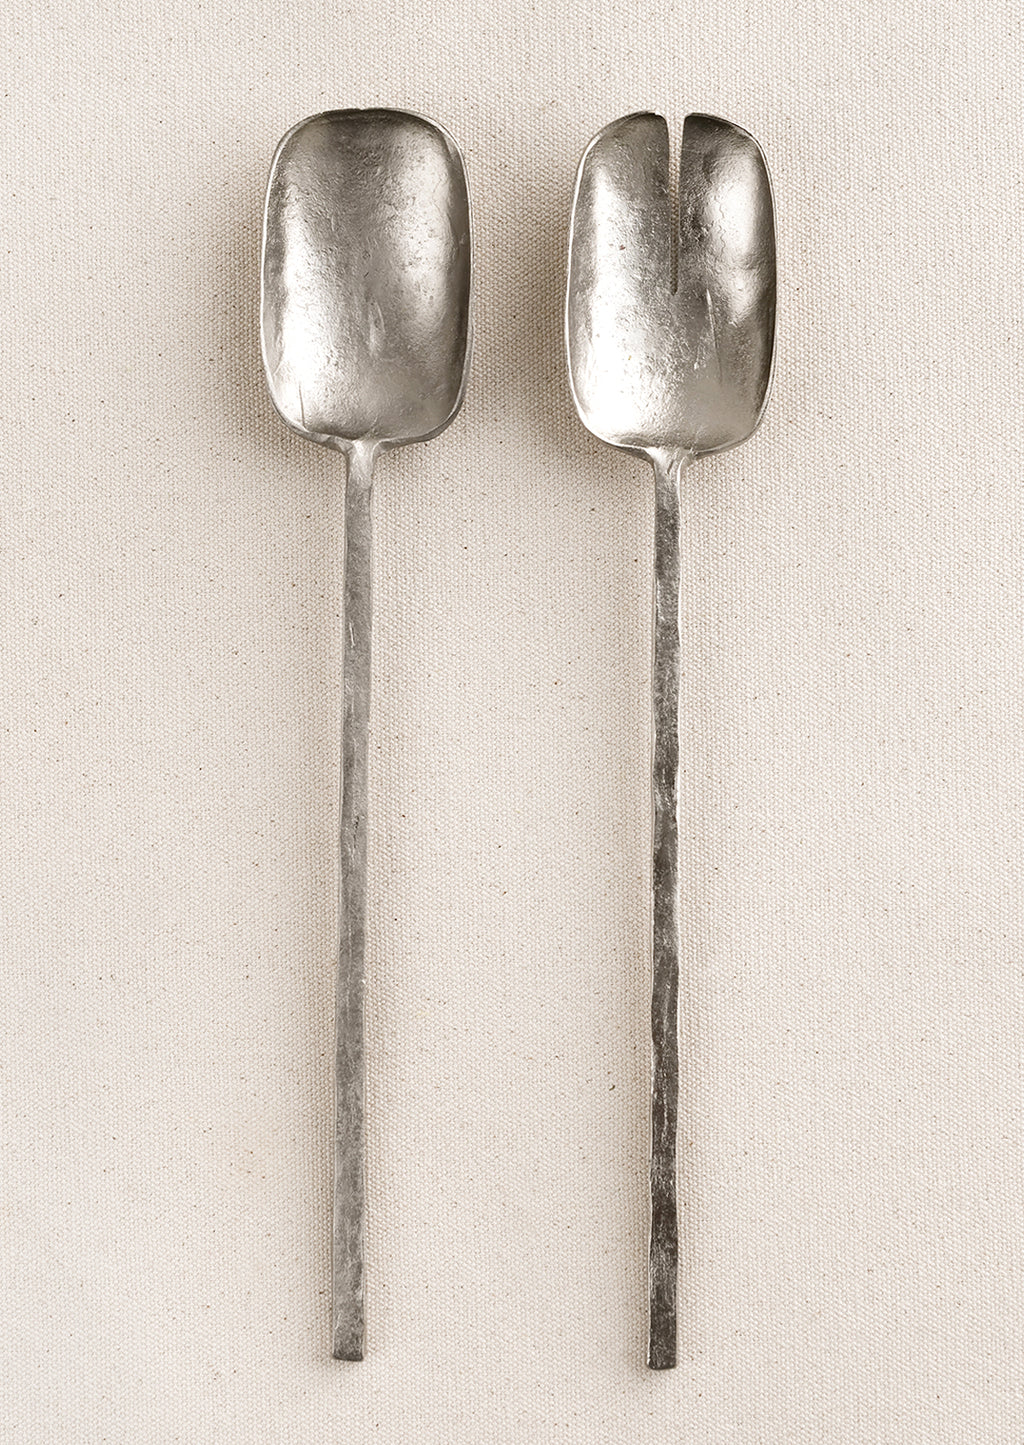 Pewter: Two piece salad serving set in a primitive silhouette, made in natural unpolished pewter finish.